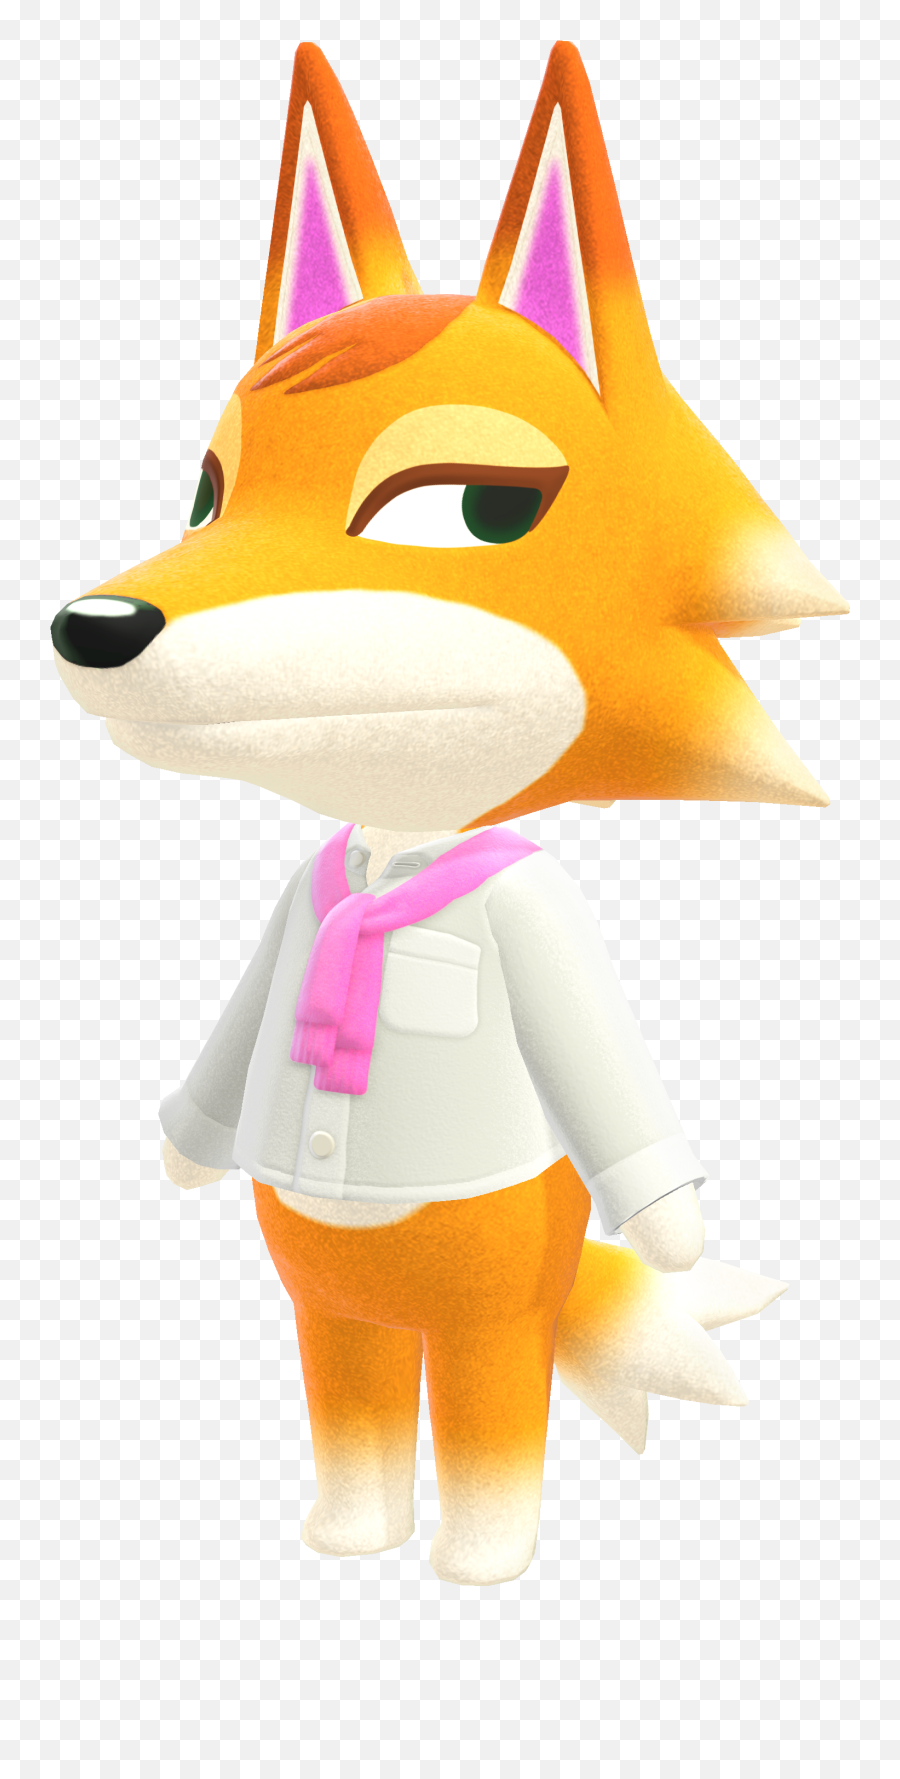 Discuss Everything About Animal Crossing Wiki Fandom - Chief New Horizons Animal Crossing Emoji,Elvis Presley Clipart